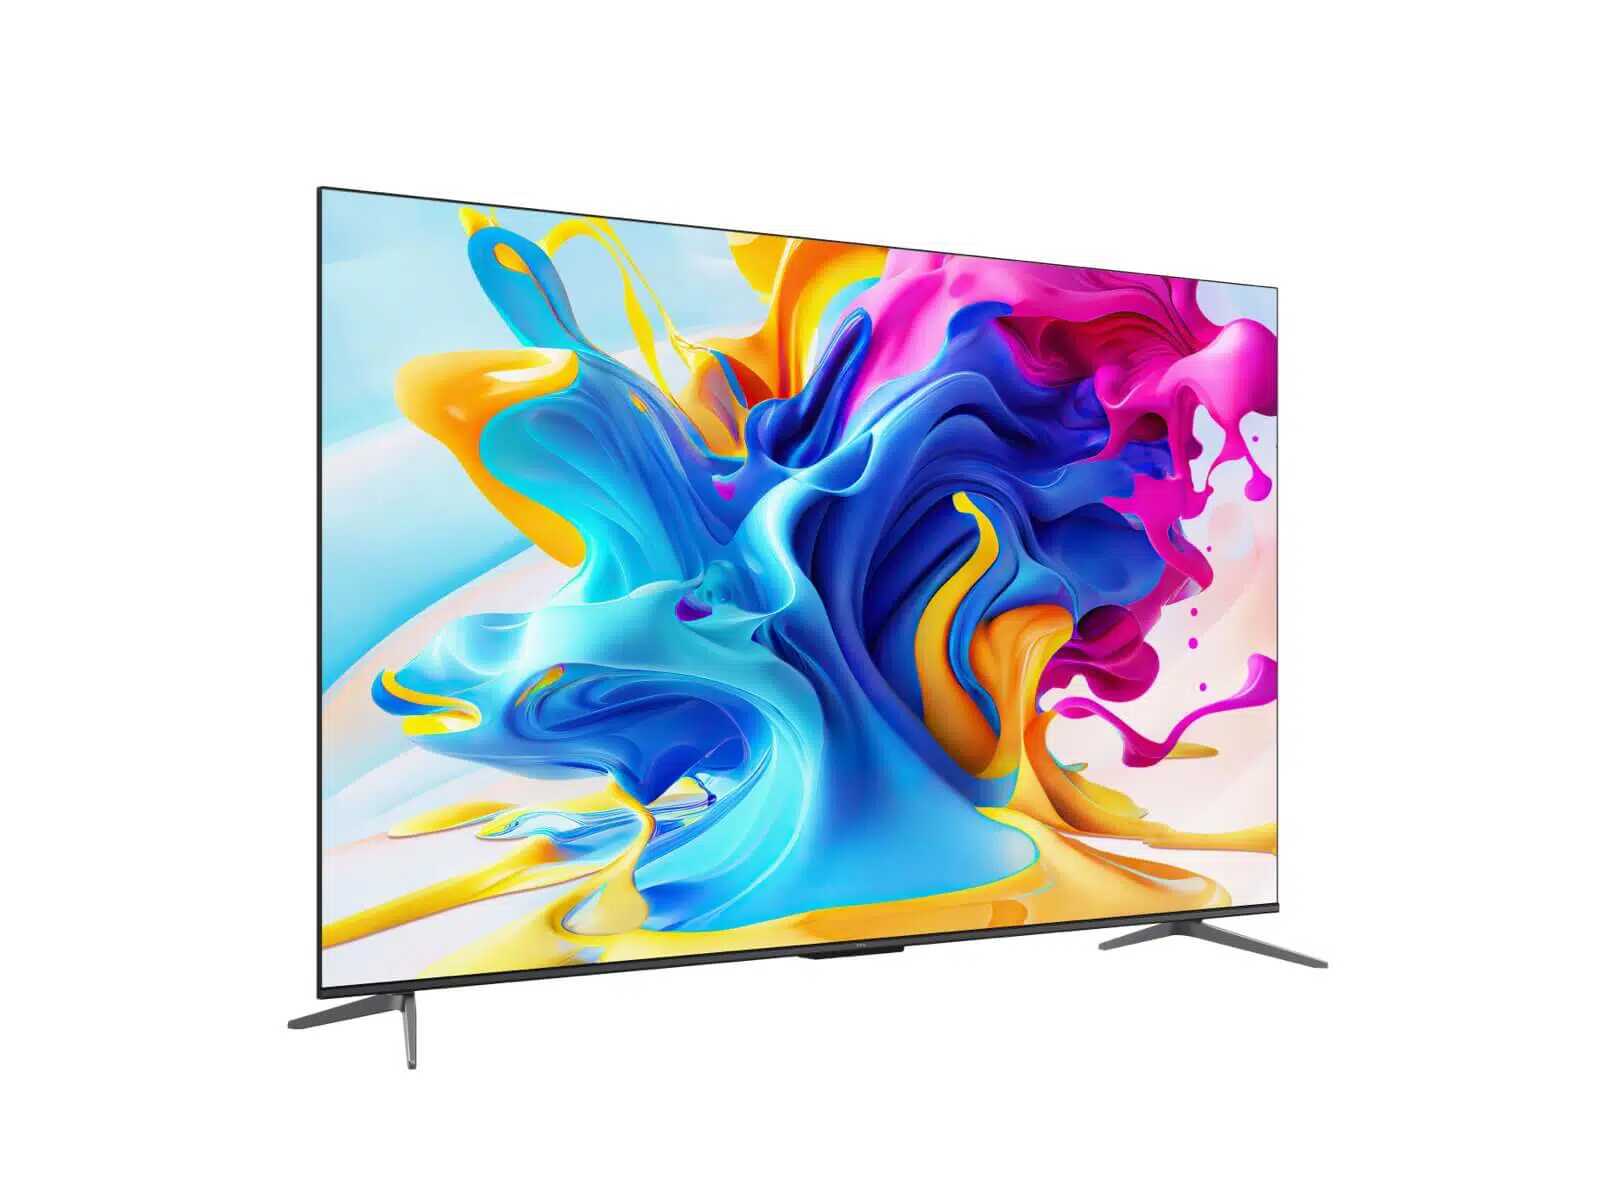 How Does A Panel For A 81-Inch QLED TV Cost